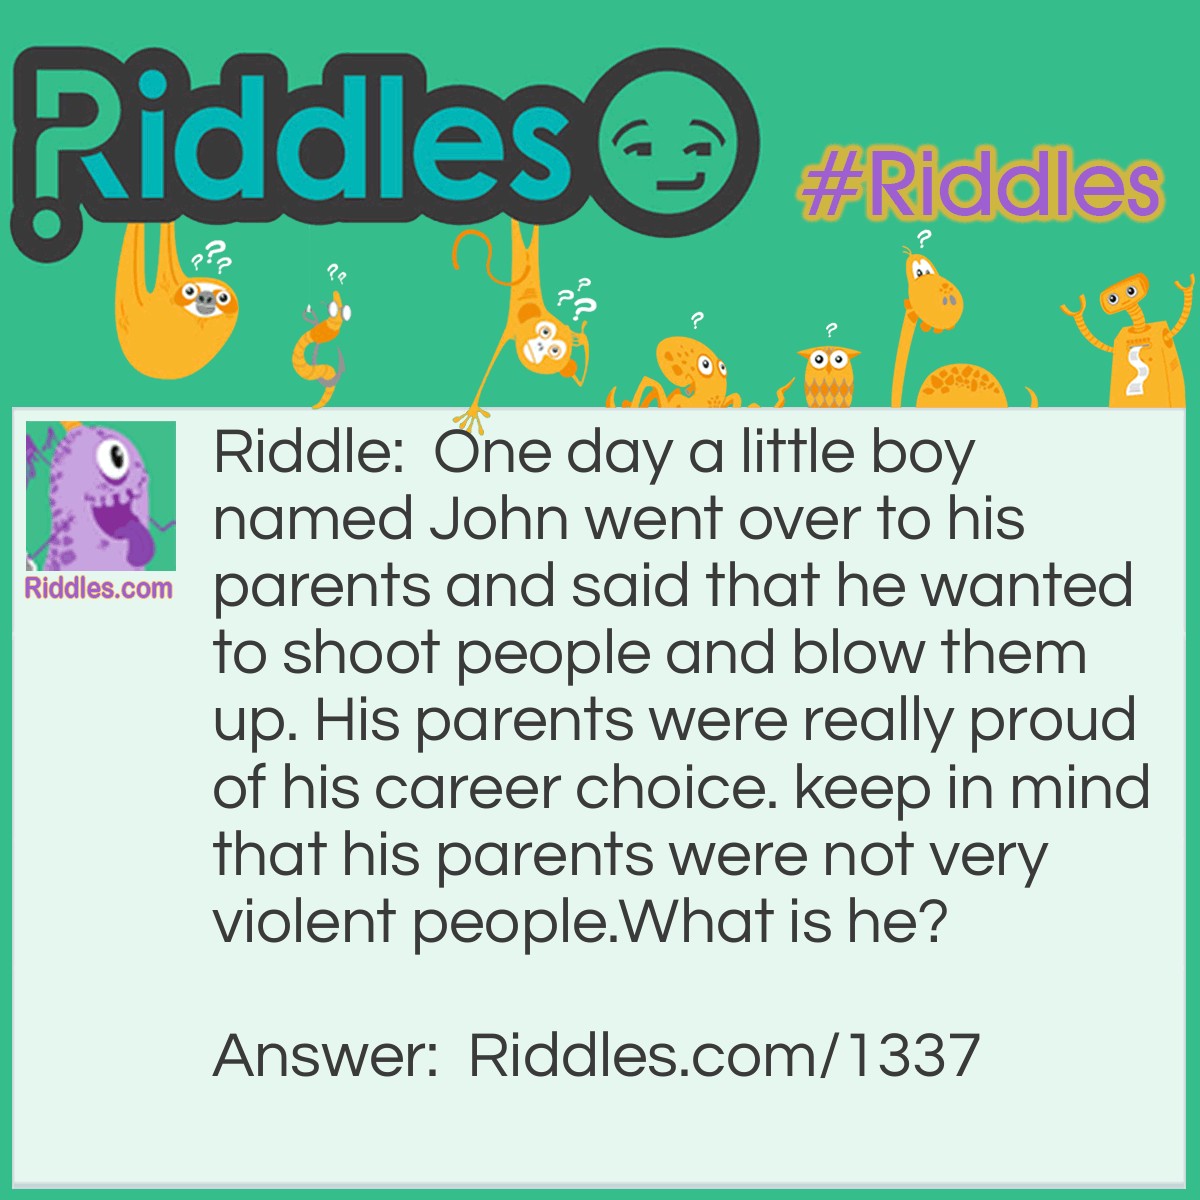 Riddle: One day a little boy named John went over to his parents and said that he wanted to shoot people and blow them up. His parents were really proud of his career choice. keep in mind that his parents were not very violent people.
What is he? Answer: John wanted to be a photographer.